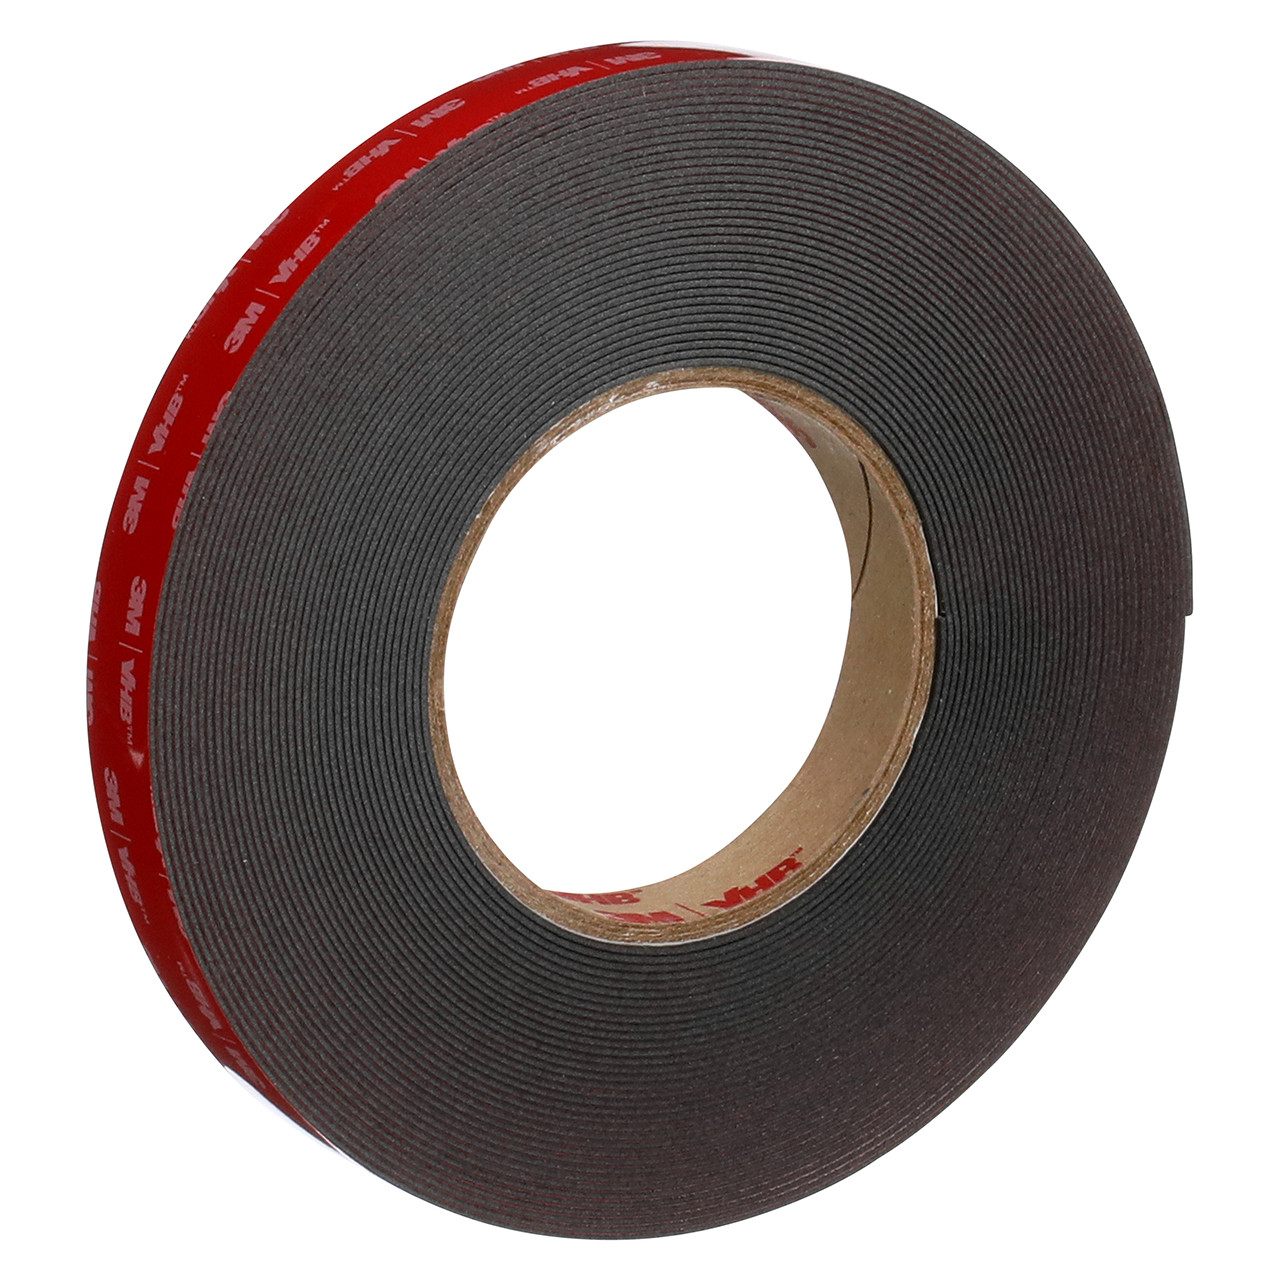 3M Double Sided VHB Tape,3/4 inch,15 yd. 5952, Black